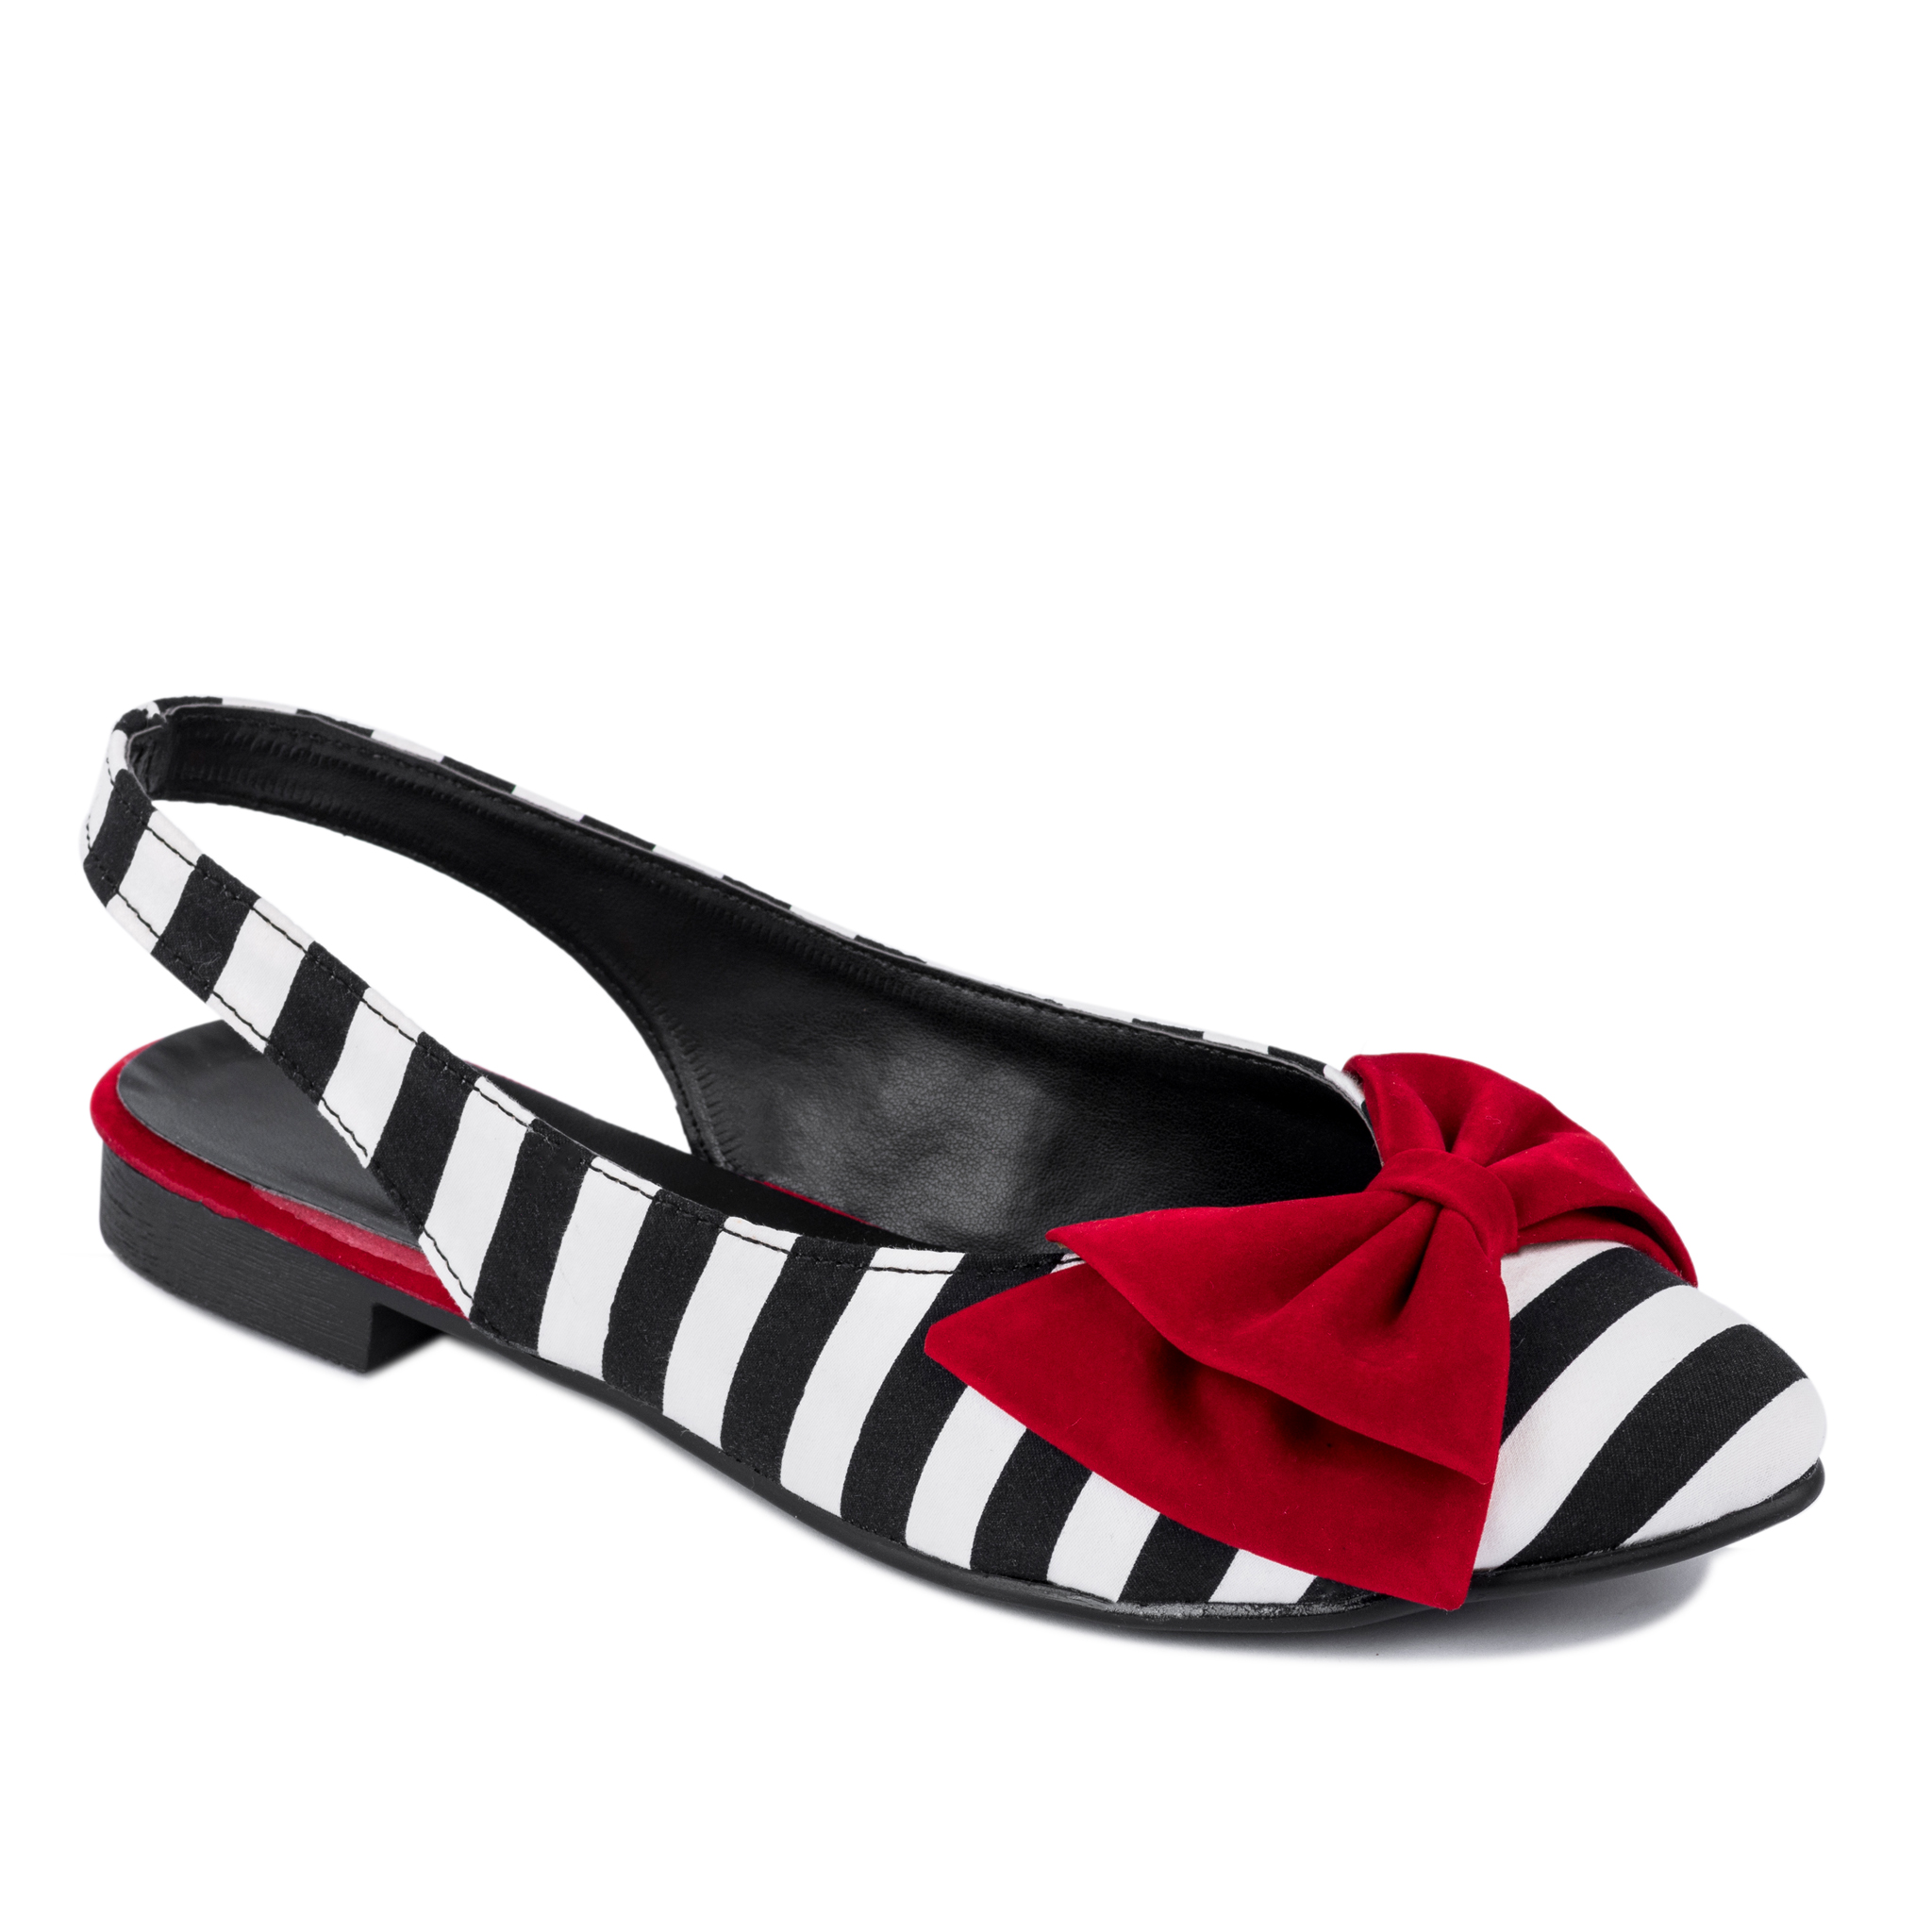 STRIPED FLATS WITH RED BOW - BLACK/WHITE